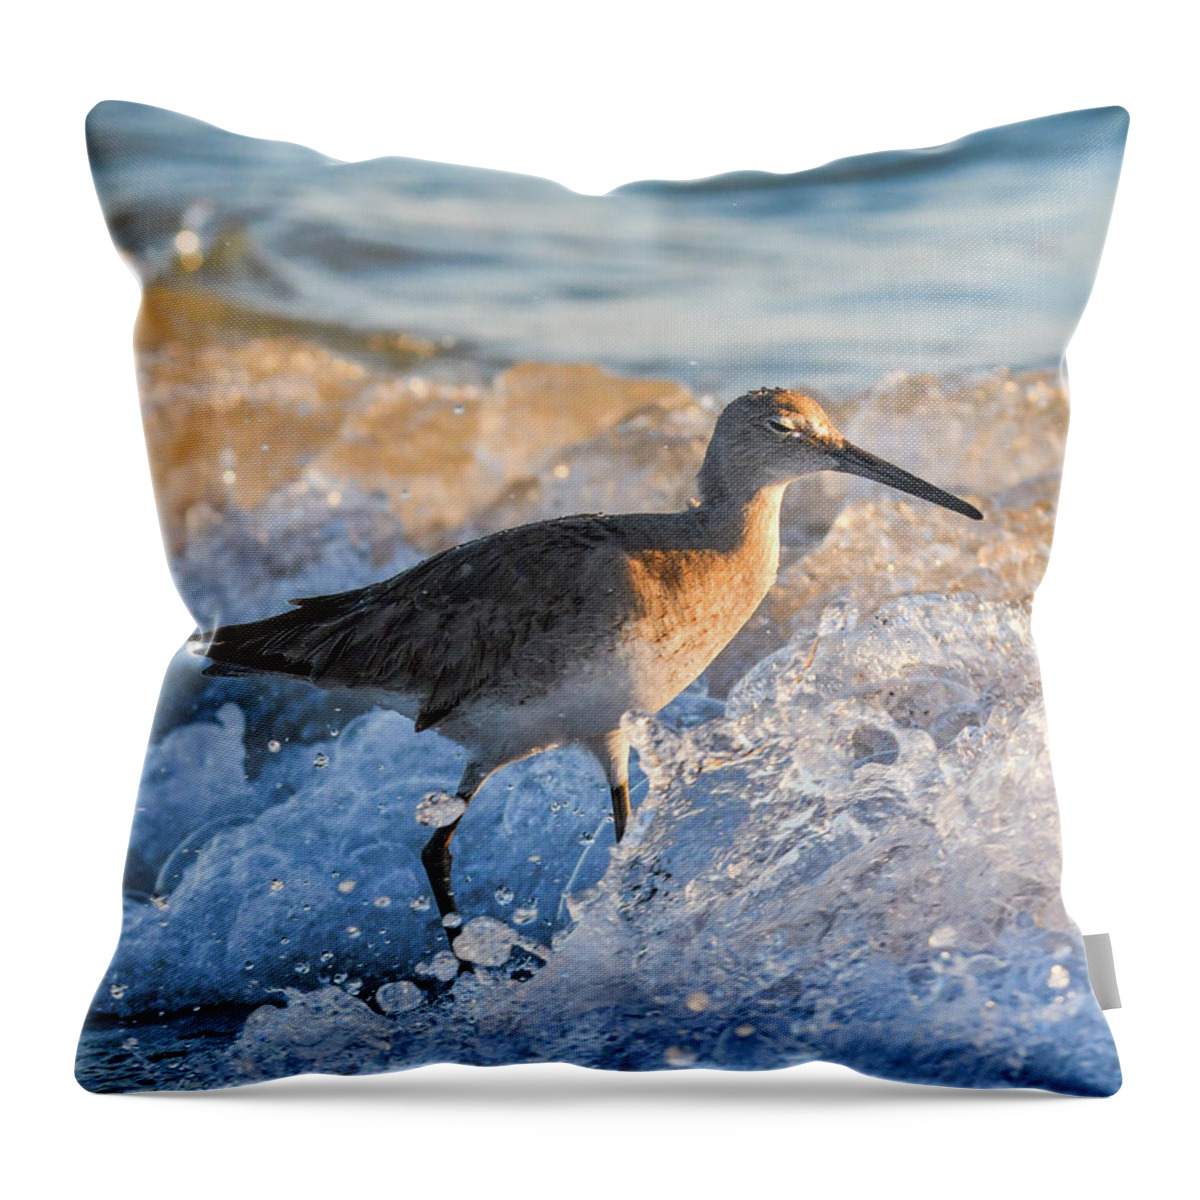 Baird's Throw Pillow featuring the photograph Sandpiper Bathing at Sunset by Artful Imagery